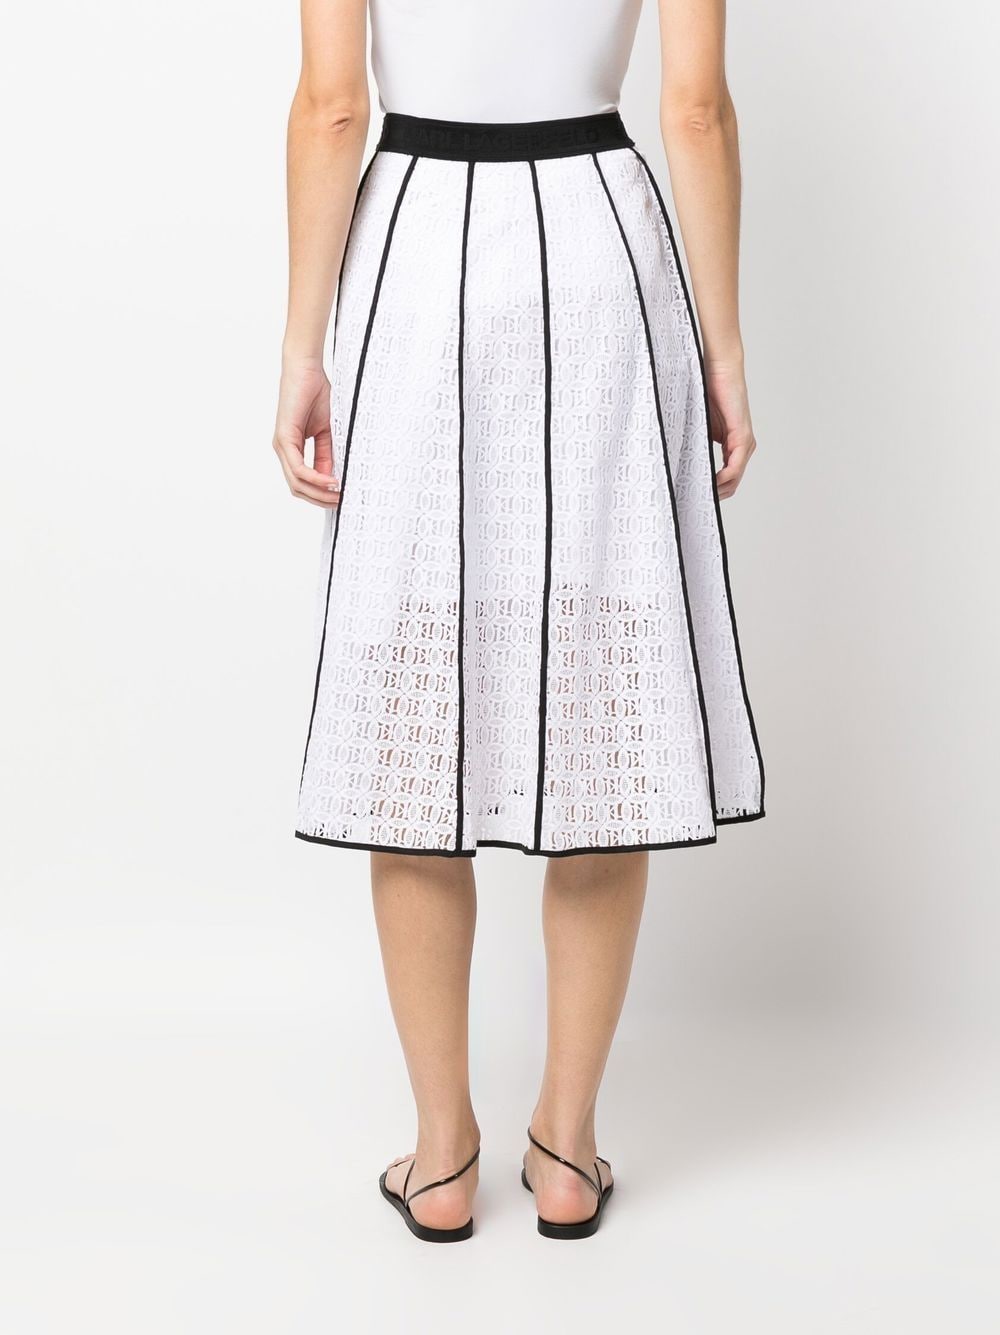 Karl Lagerfeld Kl Embroidered Lace Midi Skirt - Farfetch